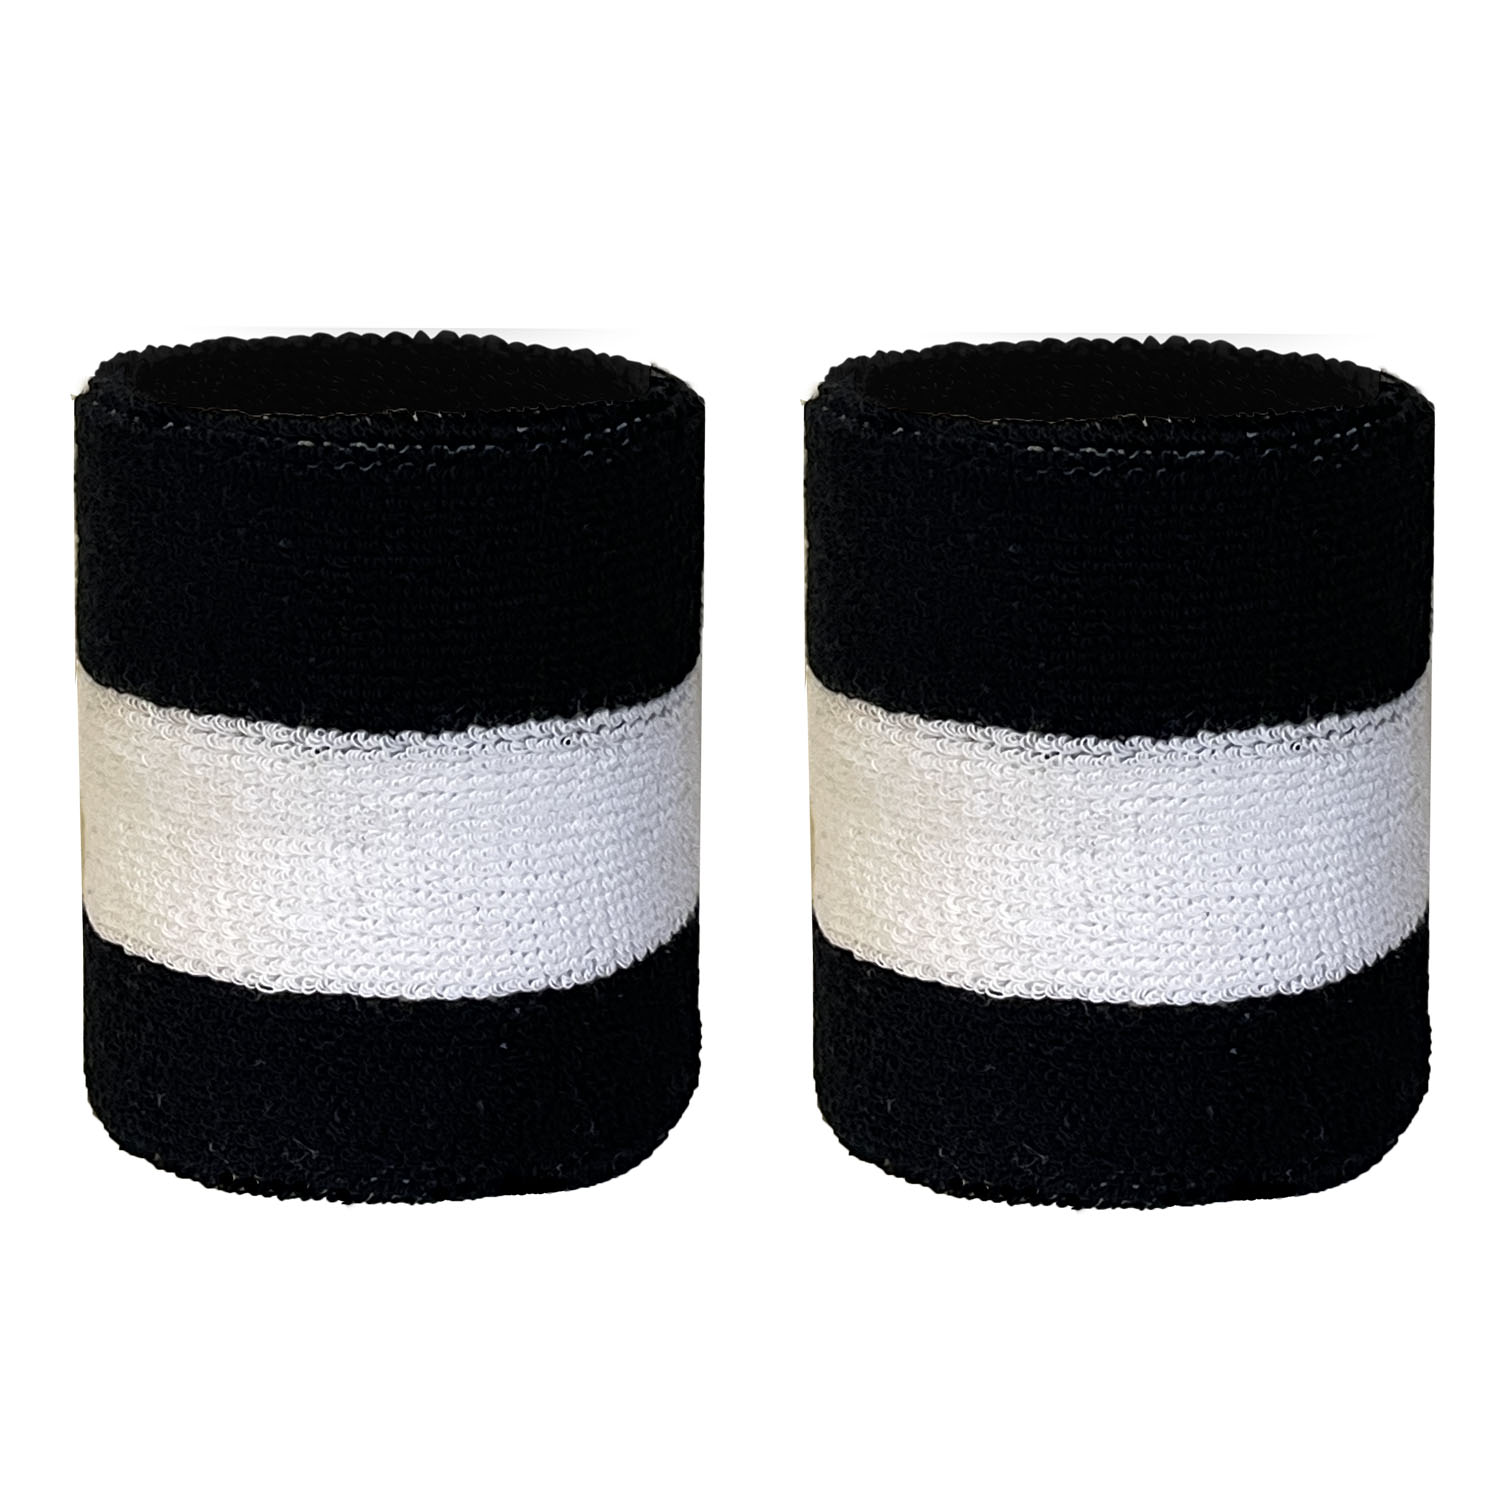 White with Black Striped Quality Wristbands, 1 Pair - Click Image to Close